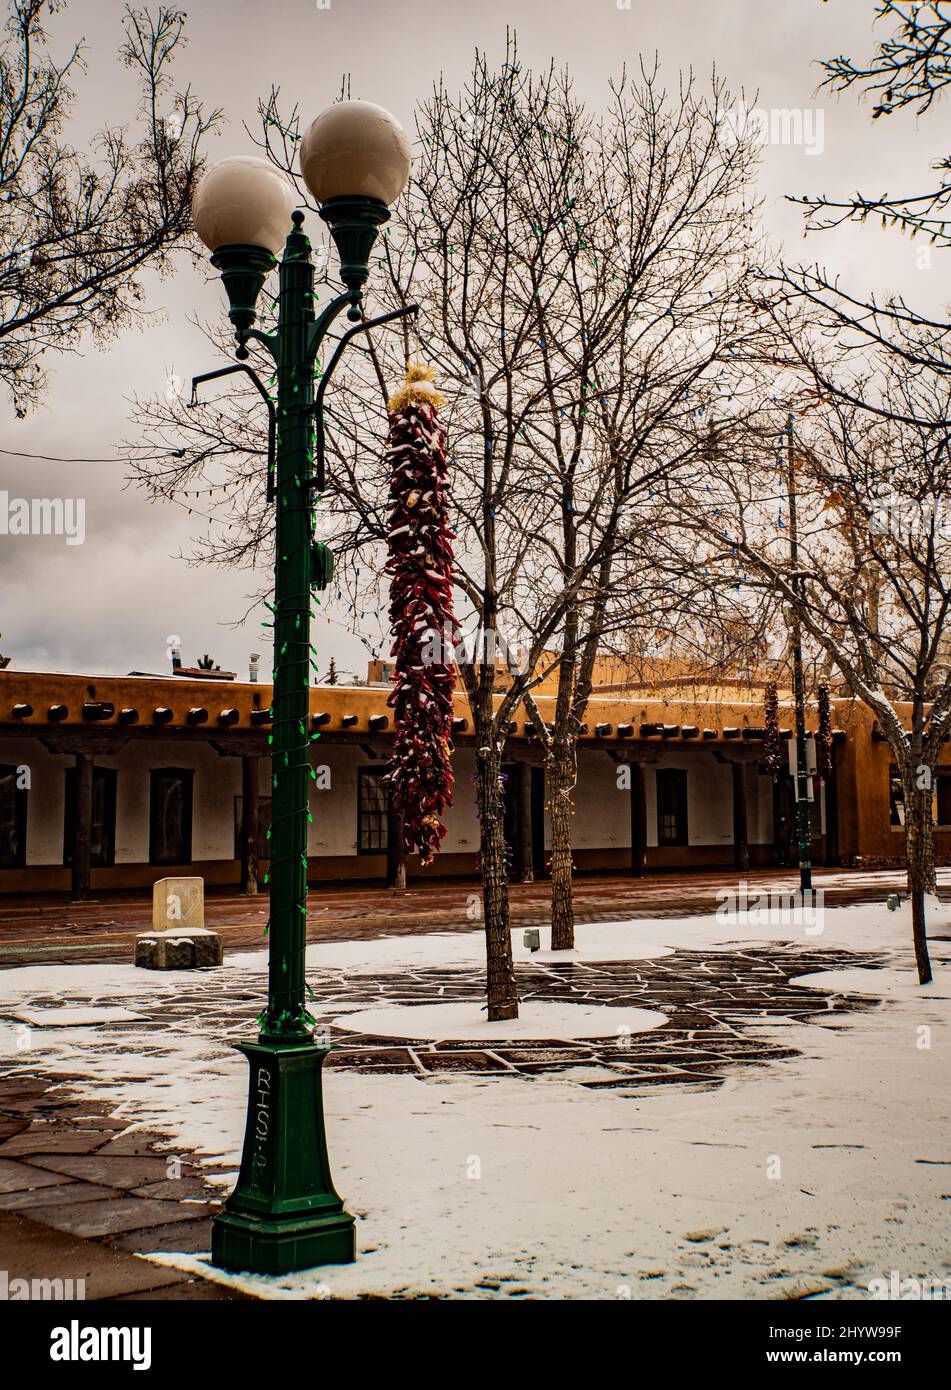 long red pepper ristras laced with snow on a winter morning at the historic Plaza in Santa Fe, New Mexico Stock Photo